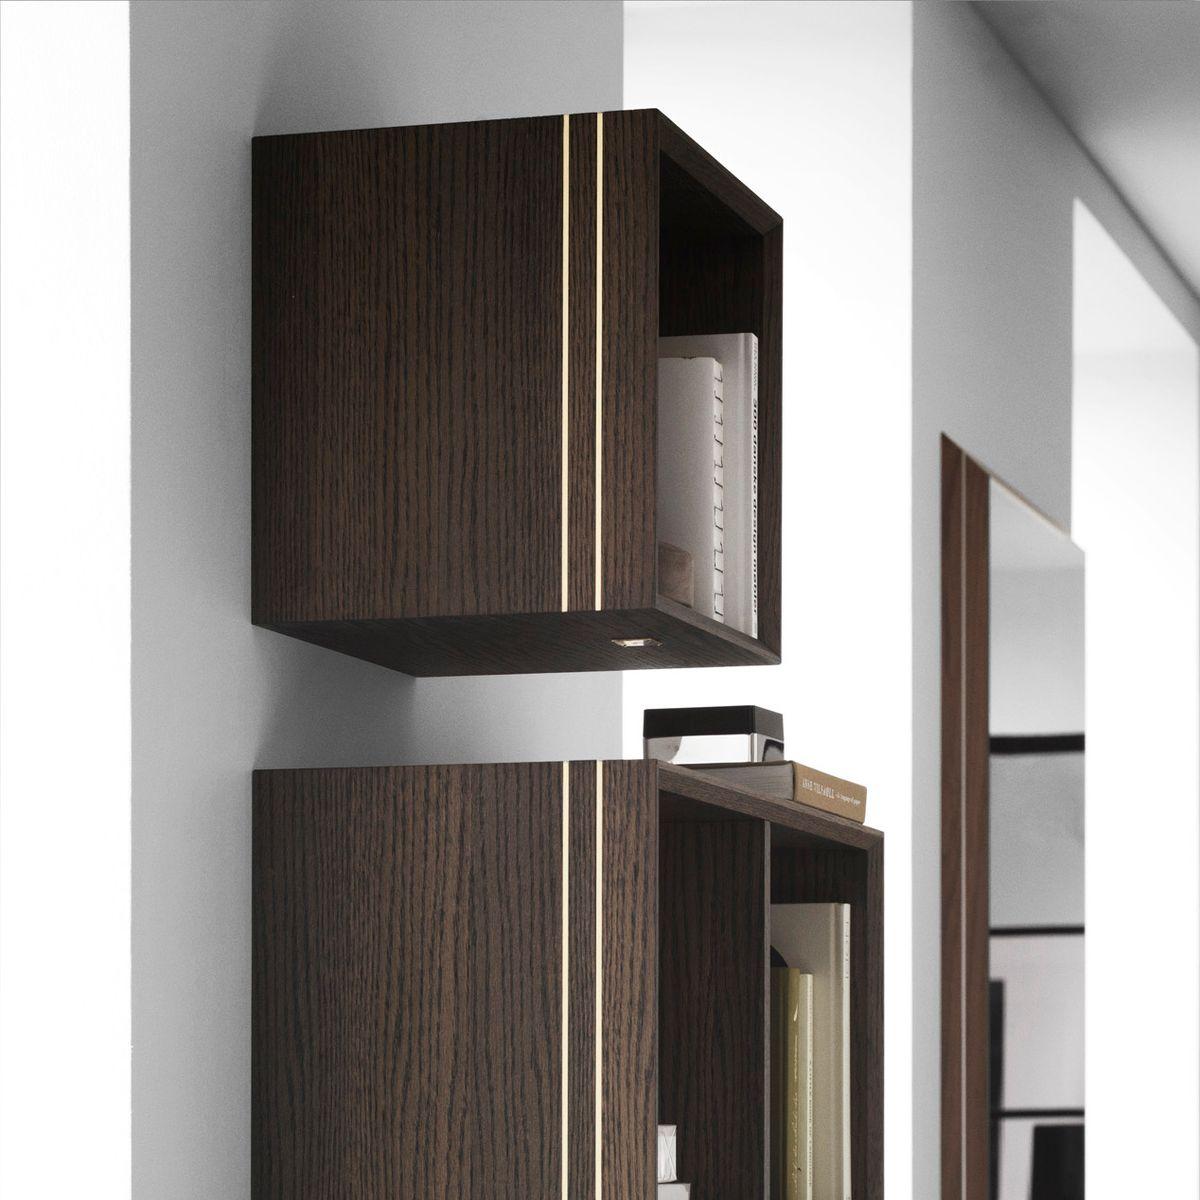 With the symmetrical appearance of a classic square, the unique handmade La Madrina bookcase provides an elegant display for your literature or small decorative items, or to use as a stylish bedside table. The use of natural materials gives the